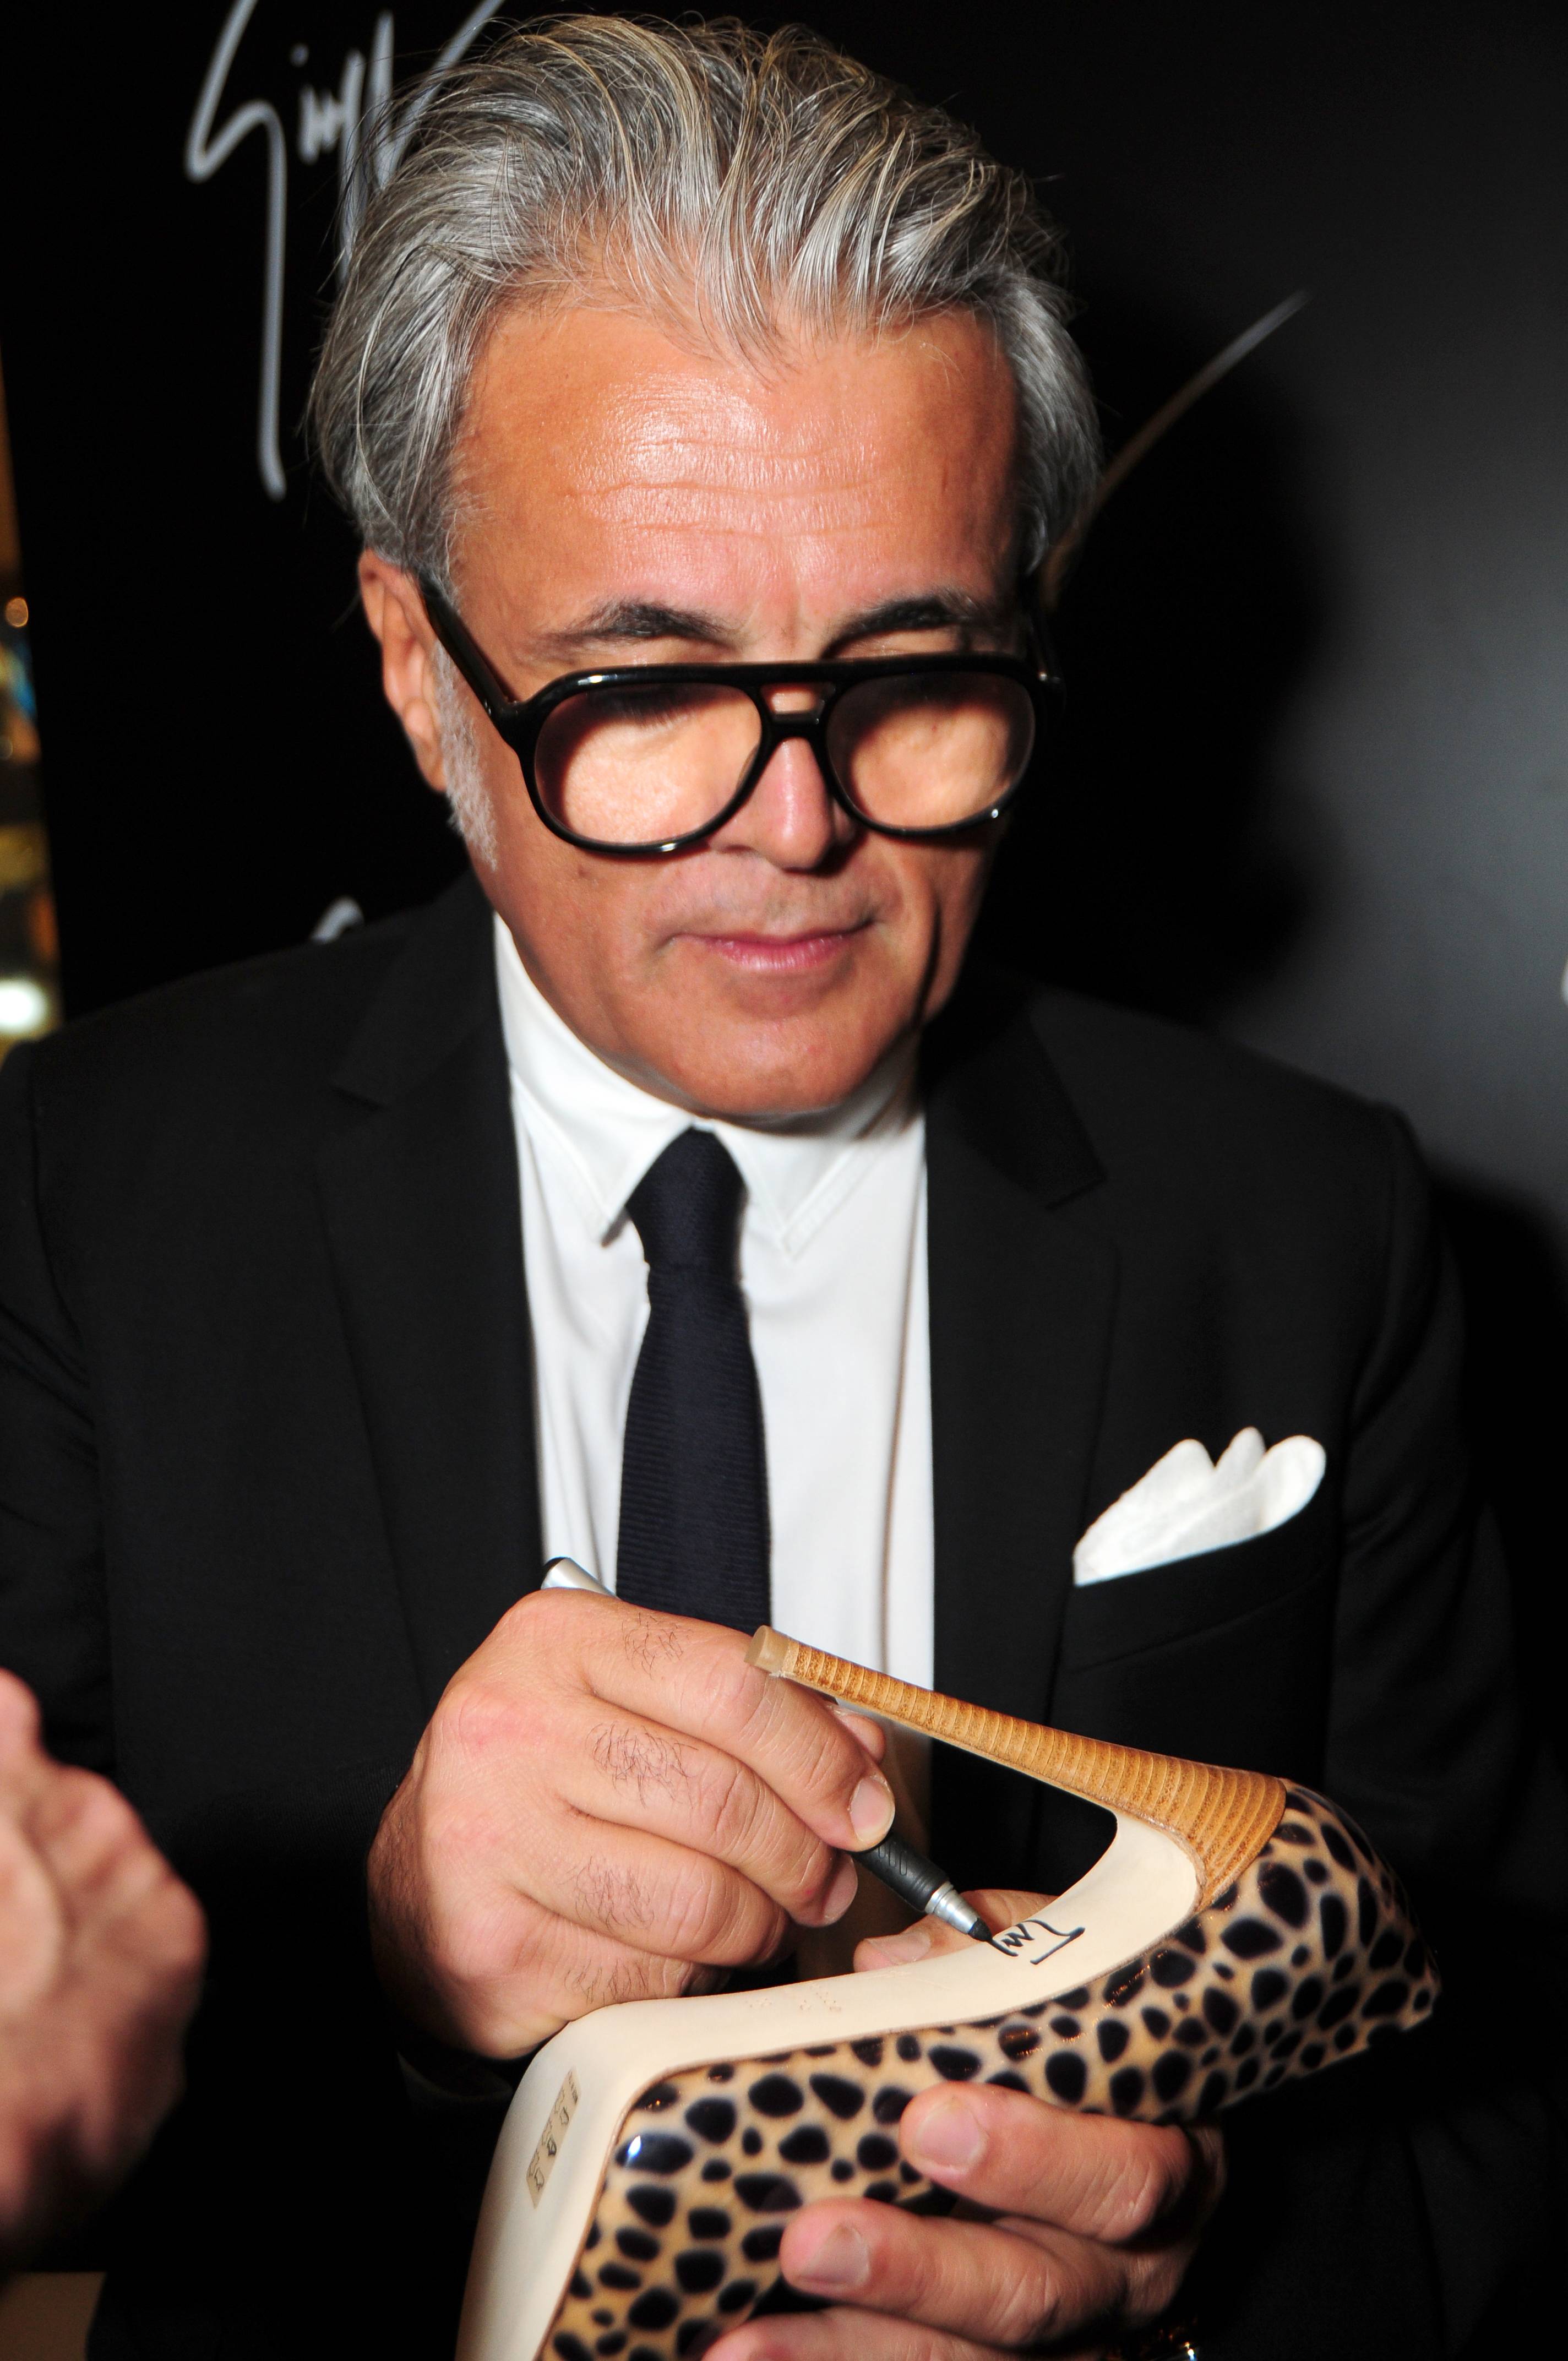 Giuseppe Zanotti signs a pair of his fabulous pumps.